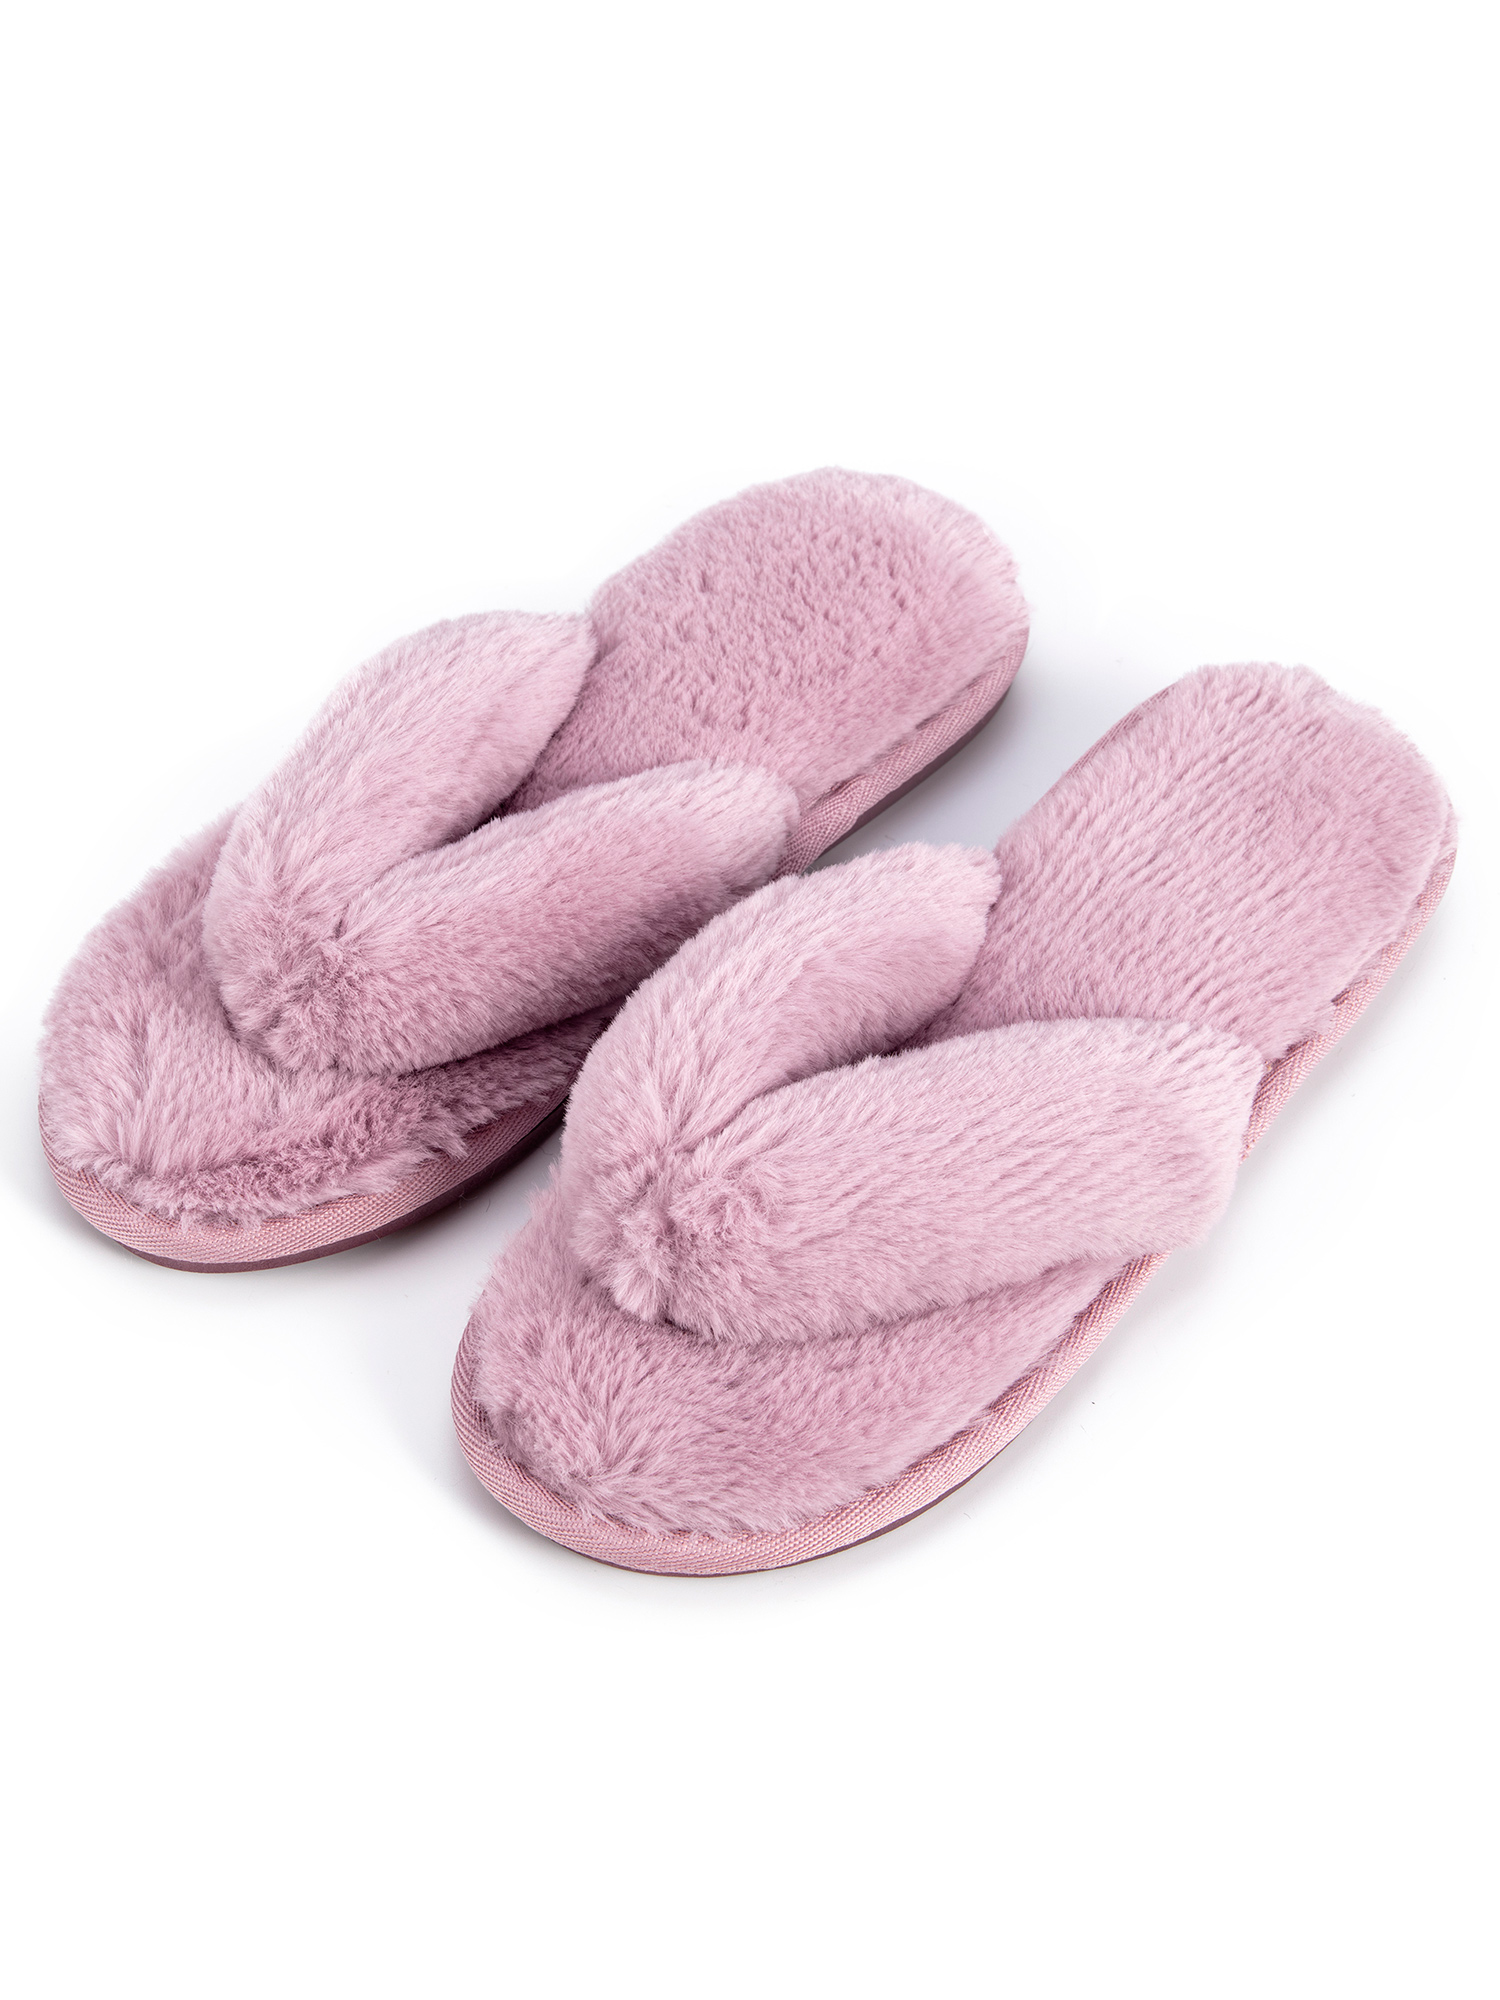 LELINTA Womens Slippers Warm Indoor House Slippers Open Toe Home Slippers for Girls Indoor Outdoor Memory Foam Slippers Cozy Slippers - image 1 of 8